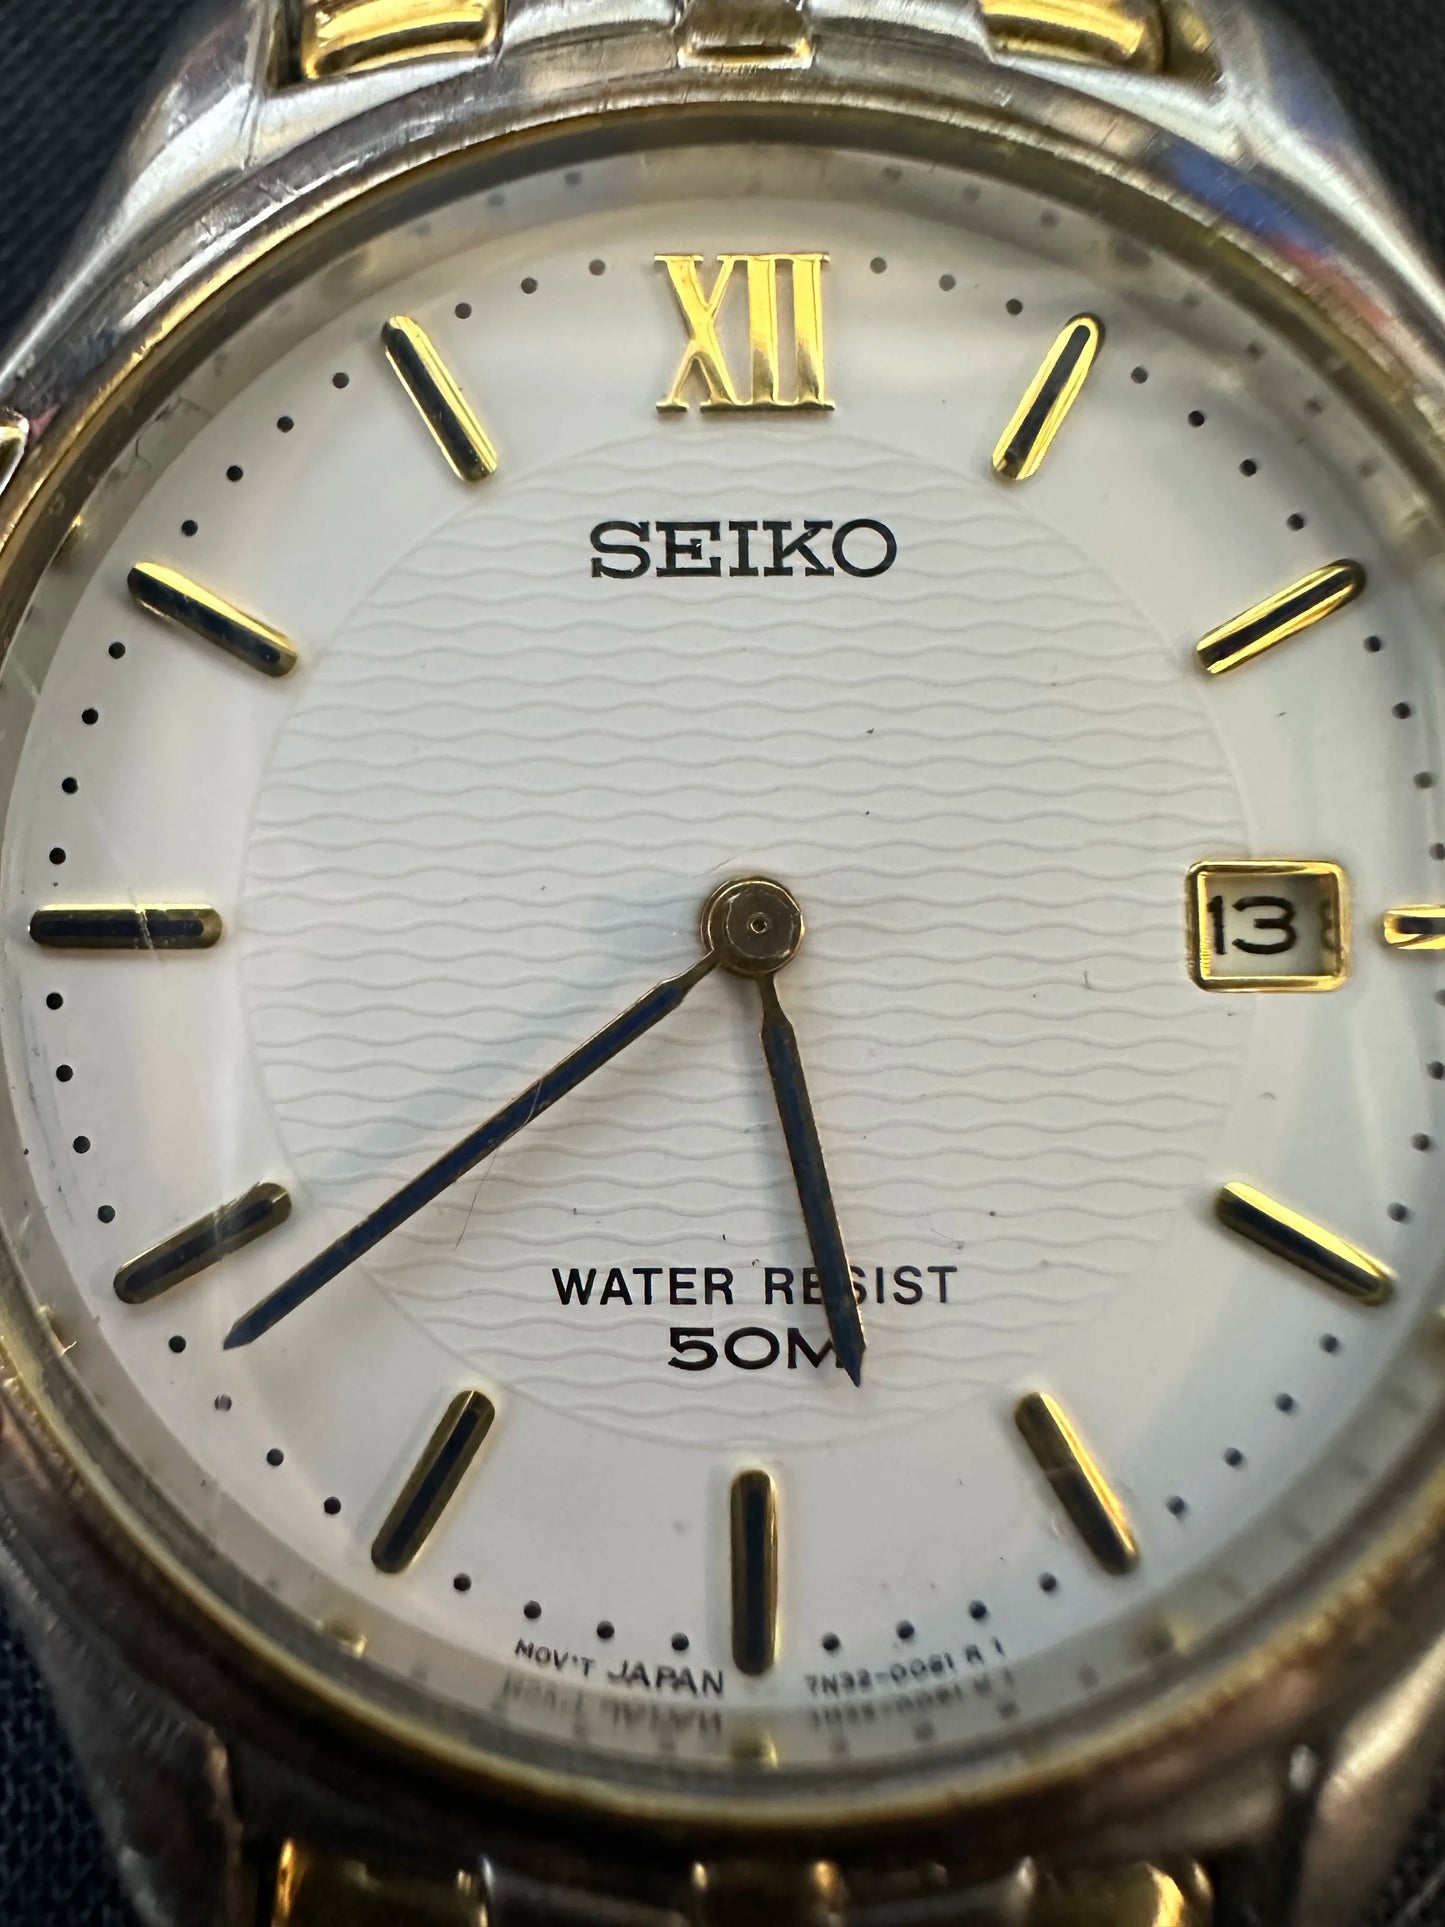 Seiko Two-Tone Classic Stainless Steel Band Men's Watch Vintage 1990s - 7N32-0049 R1